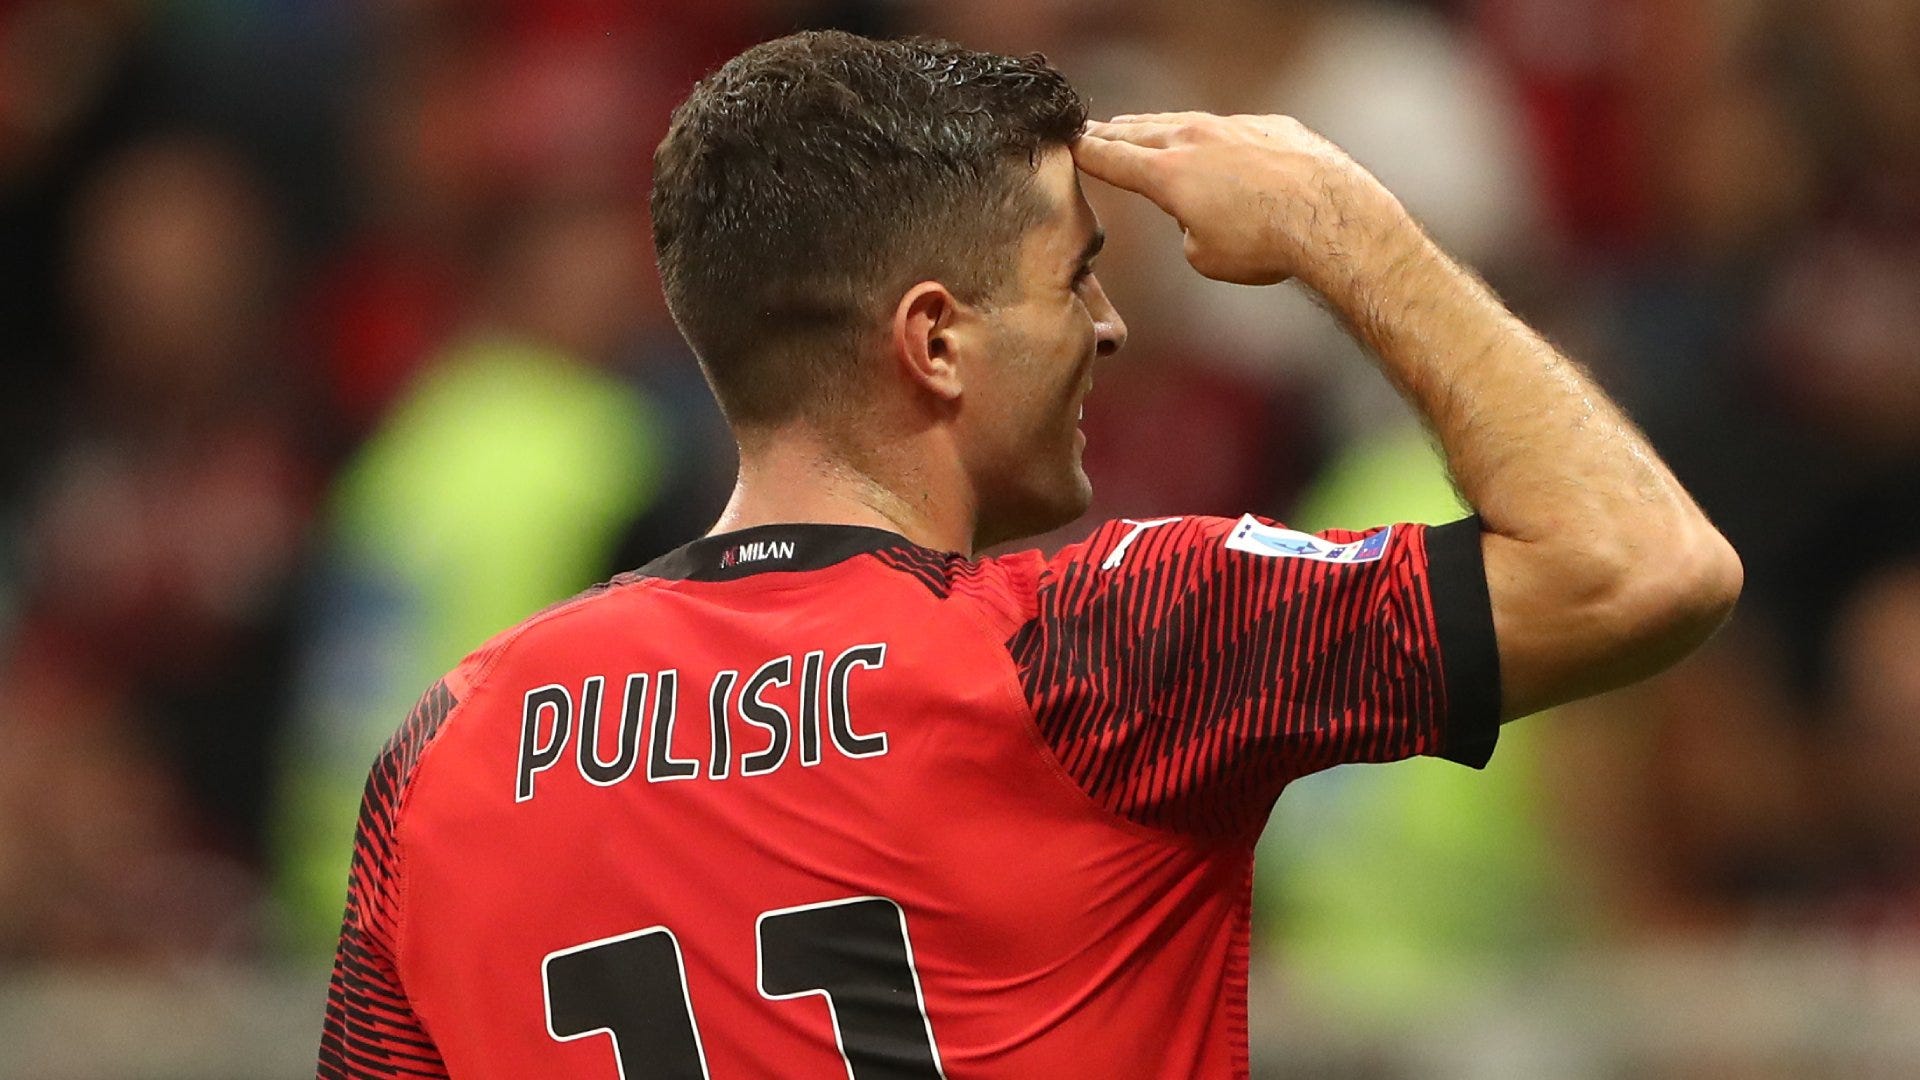 WATCH: Wholesome! Smiling AC Milan & USMNT star Christian Pulisic shown his dad's reaction to crucial goal against Lazio in Serie A